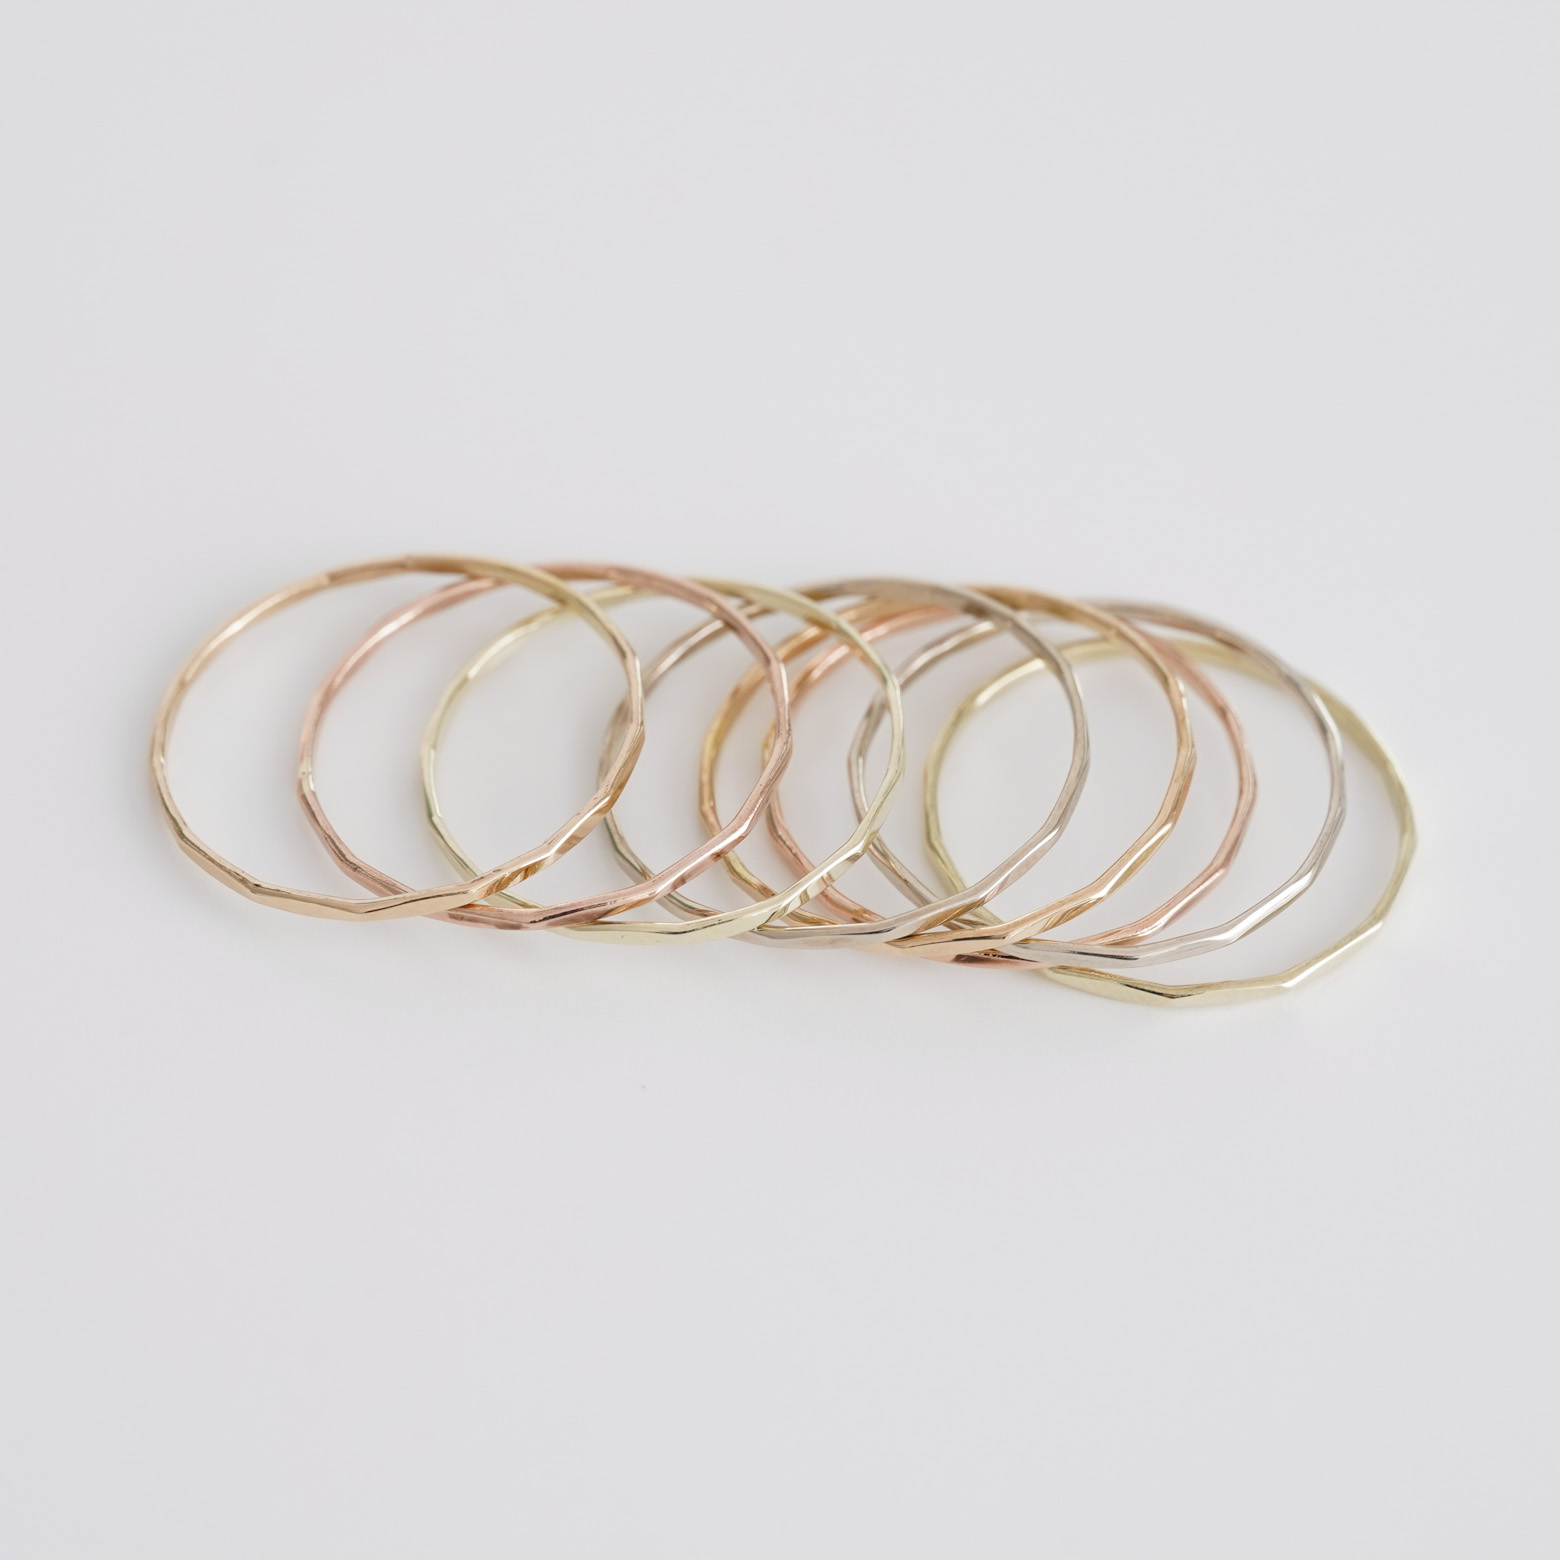 Gold Stacking Rings/8pieces Set (Melissa Joy Manning) - SOURCE objects